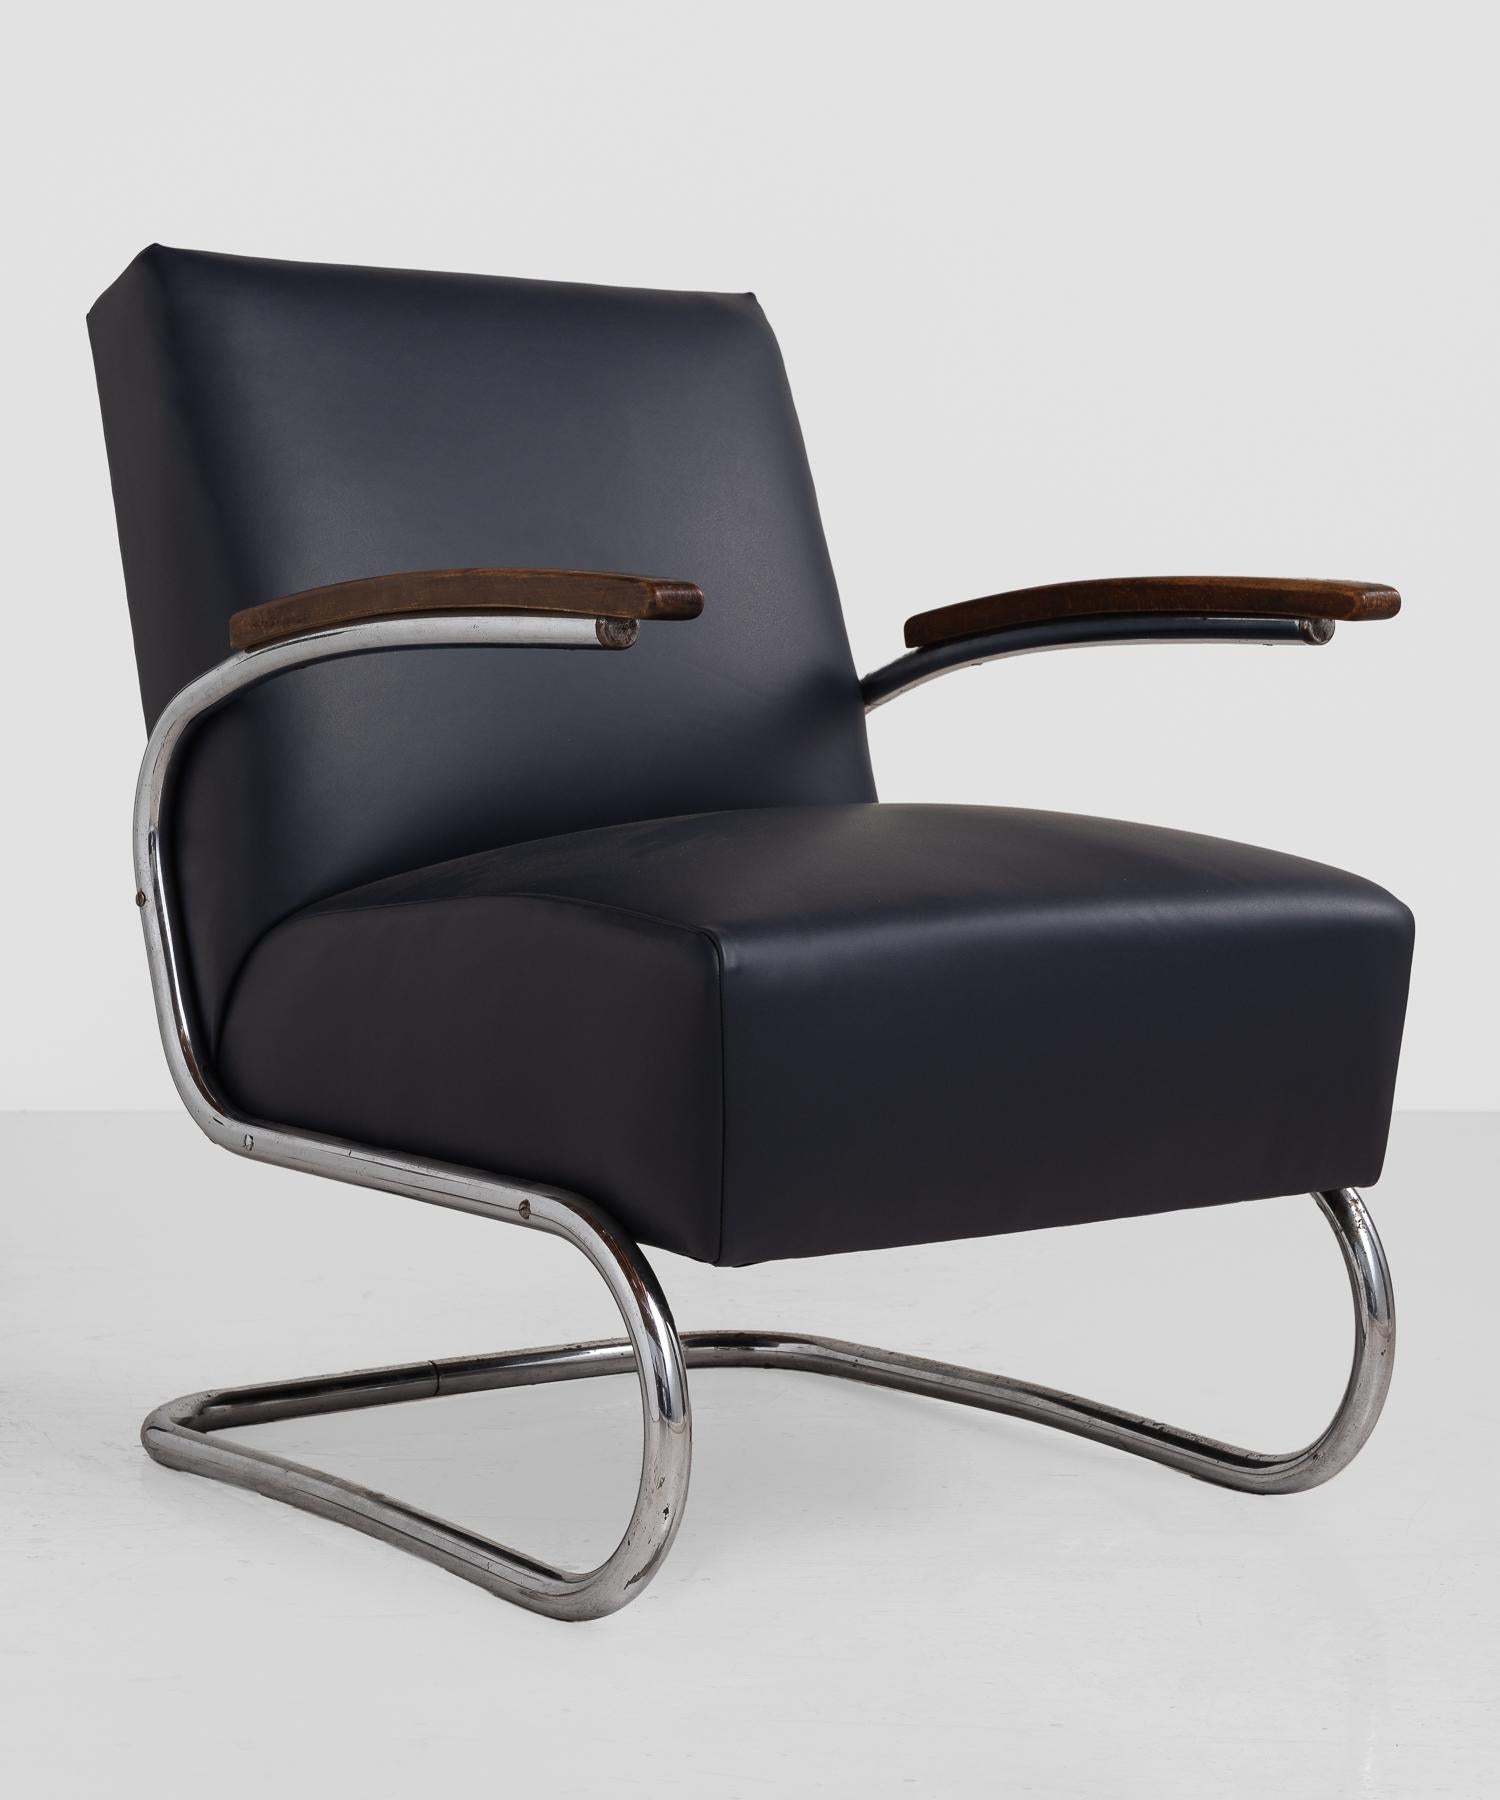 Thonet Modern Leather Armchair, Germany circa 1930

Model SS41 Thonet armchair, newly reupholstered in Admiral leather by Maharam. Cantilever frame in chromed steel with wooden armrests.

Measures: 27.5